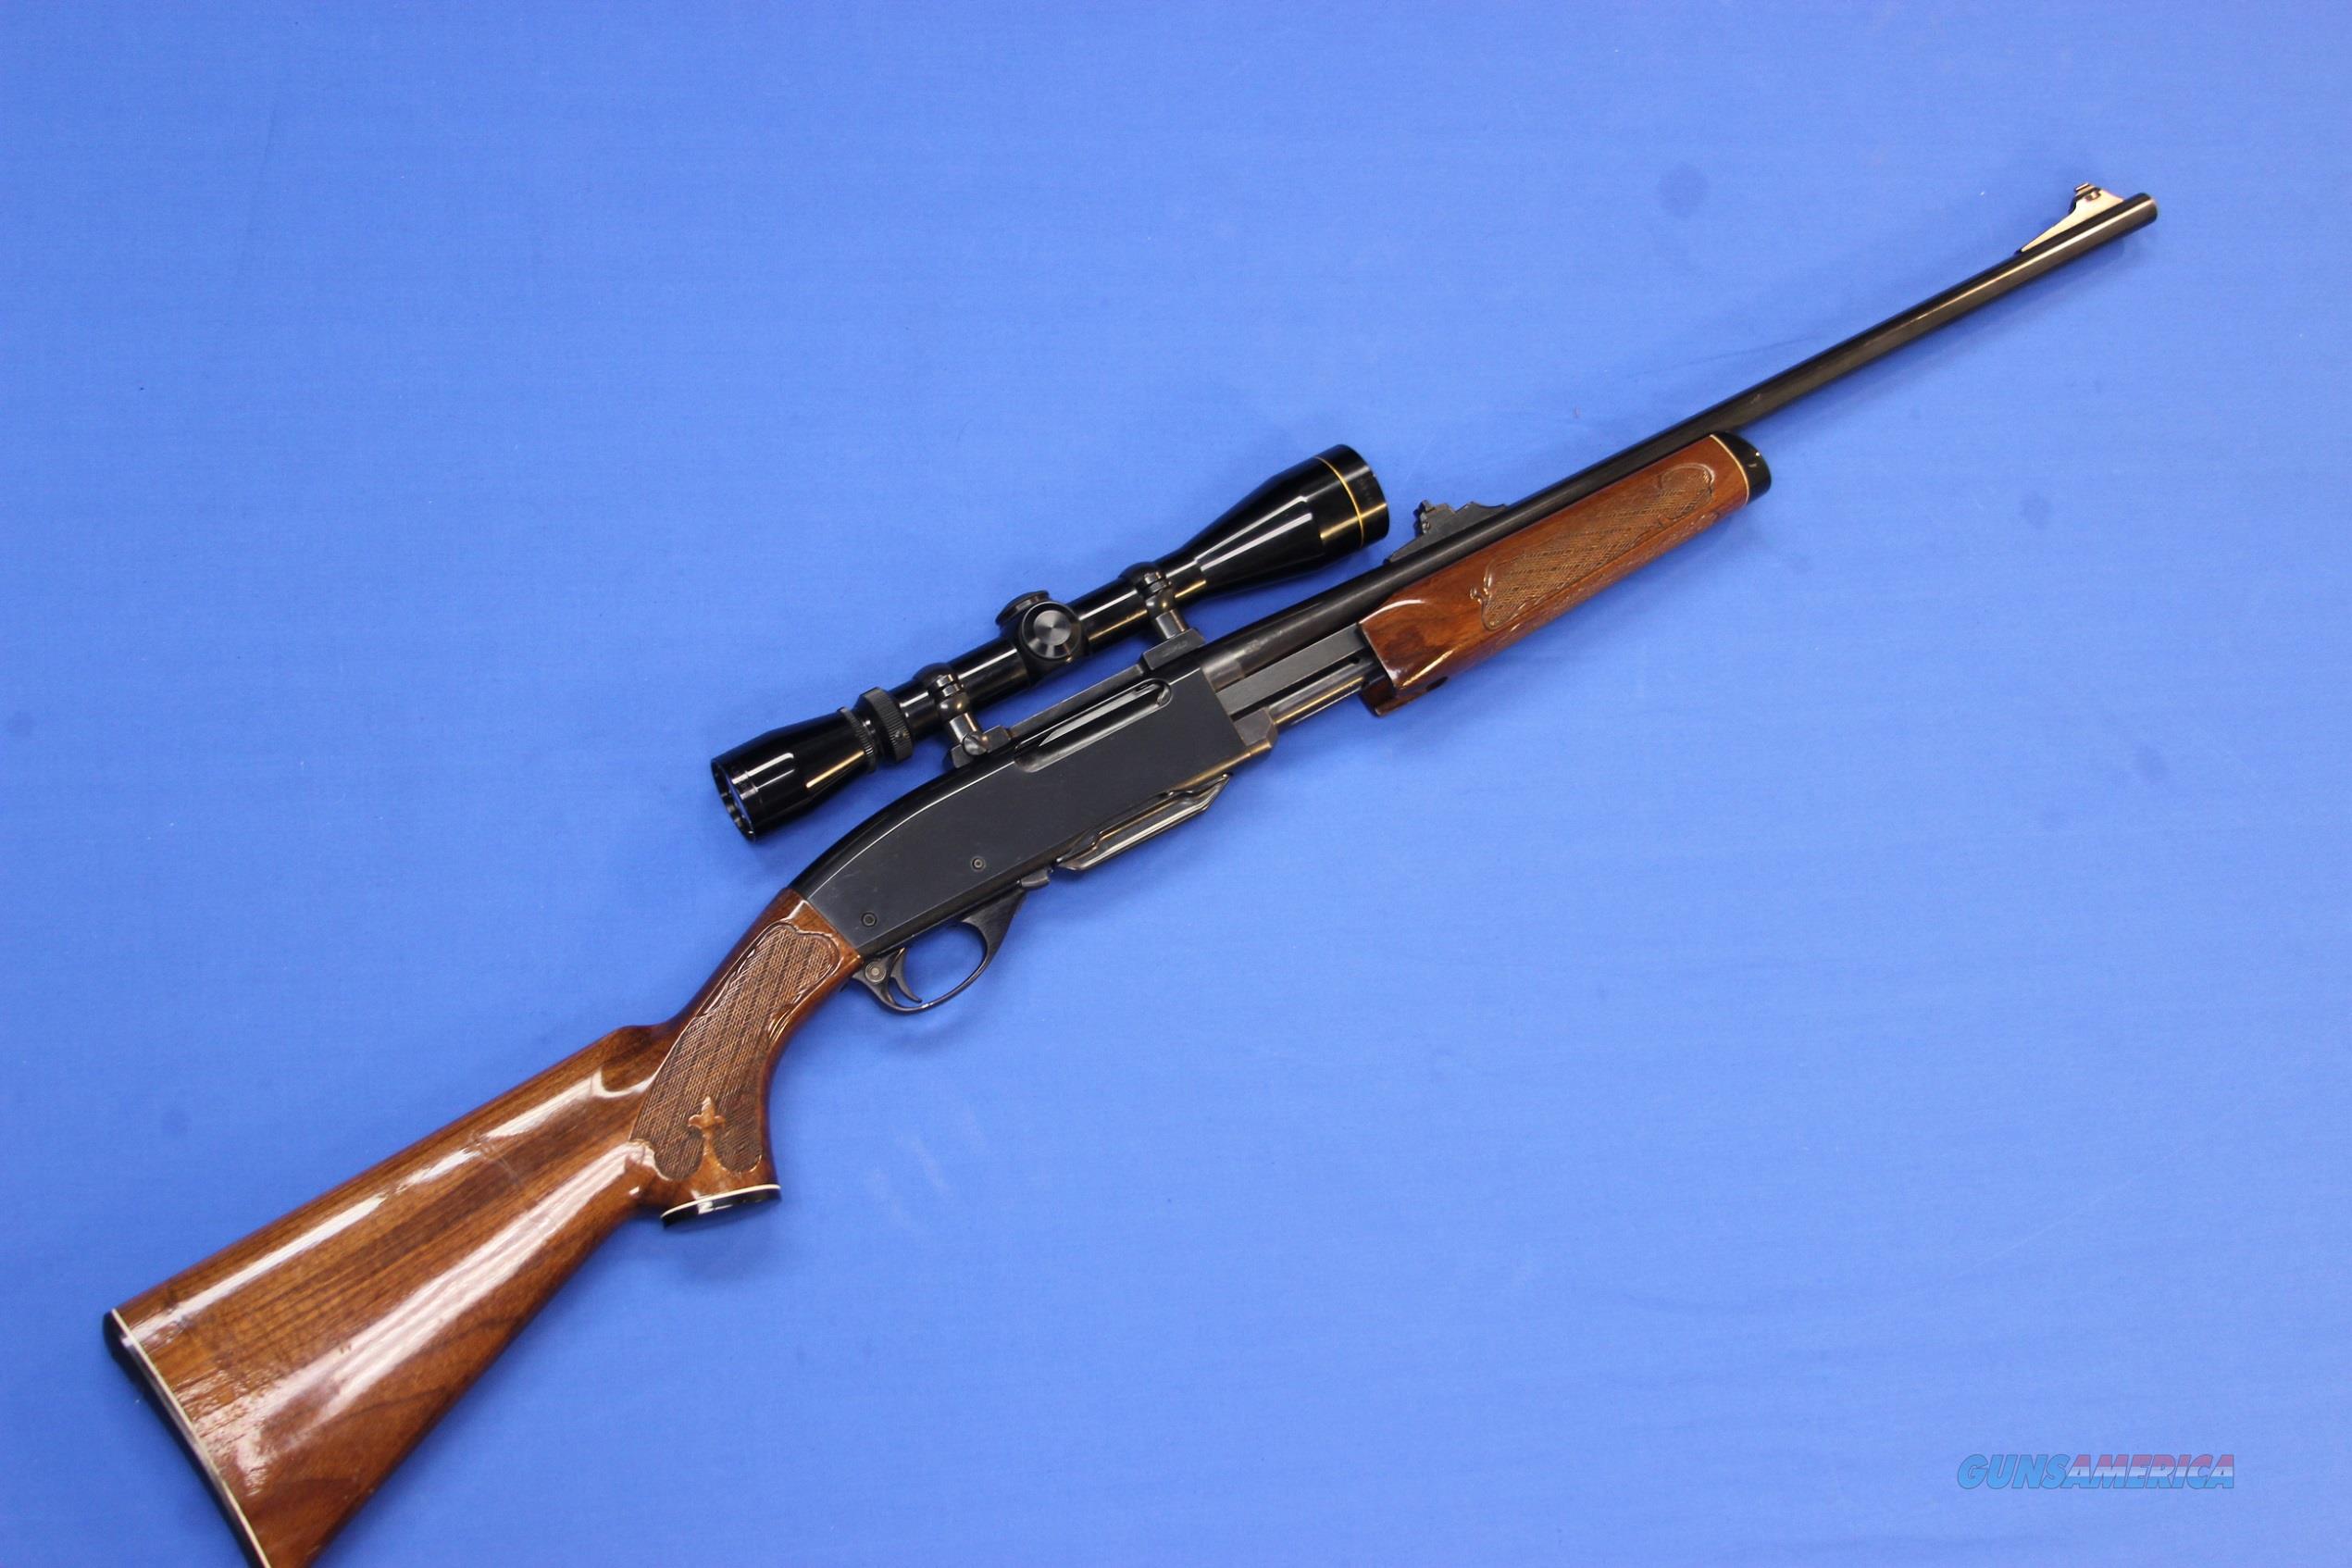 For sale we have a Remington model 760 Gamemaster pump rifle in .30-06 Spri...